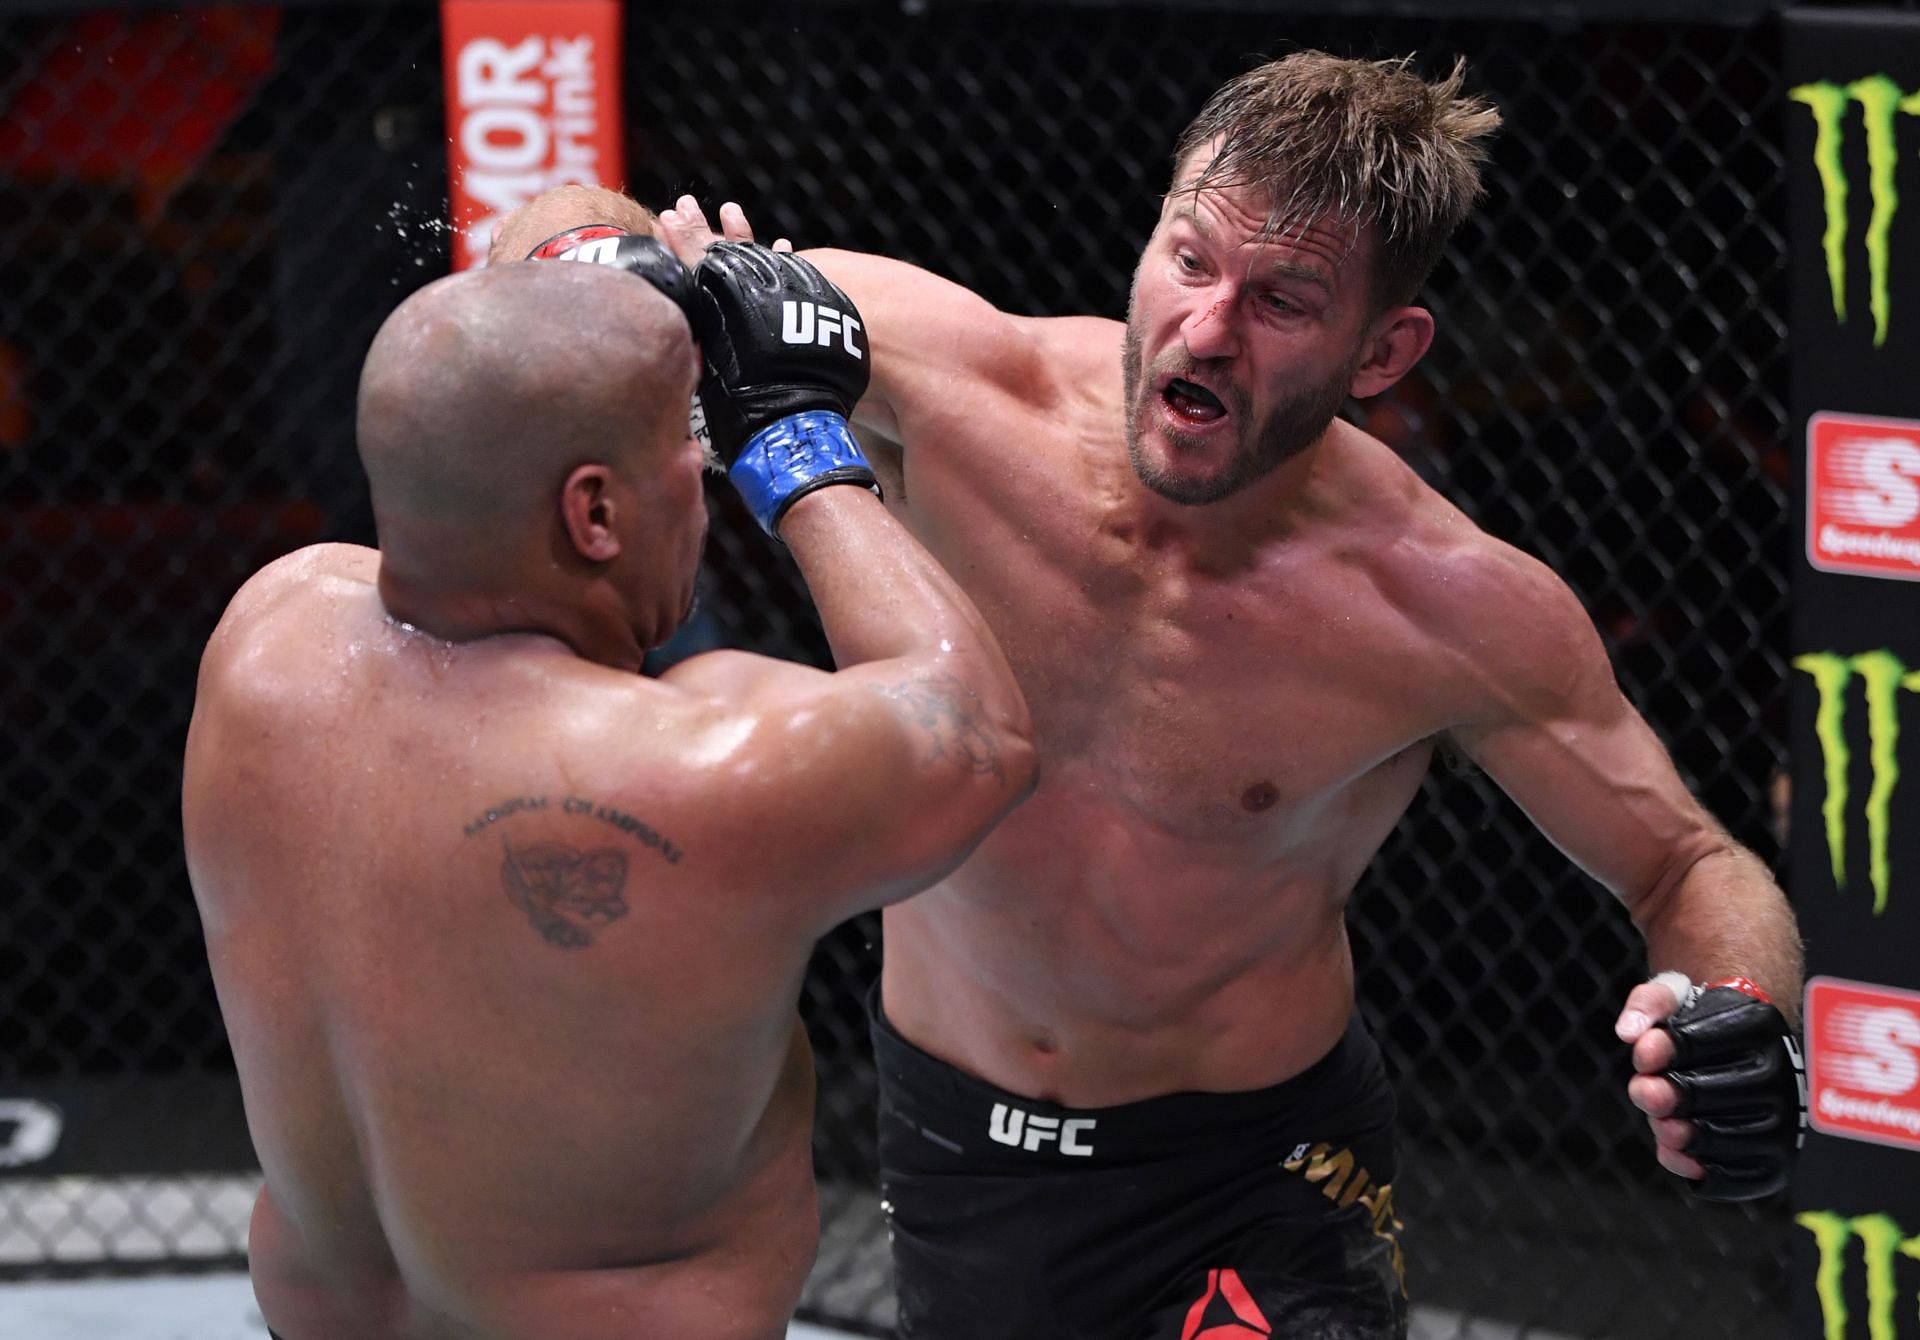 Stipe Miocic has nothing left to prove in the UFC - and may choose to step away next year